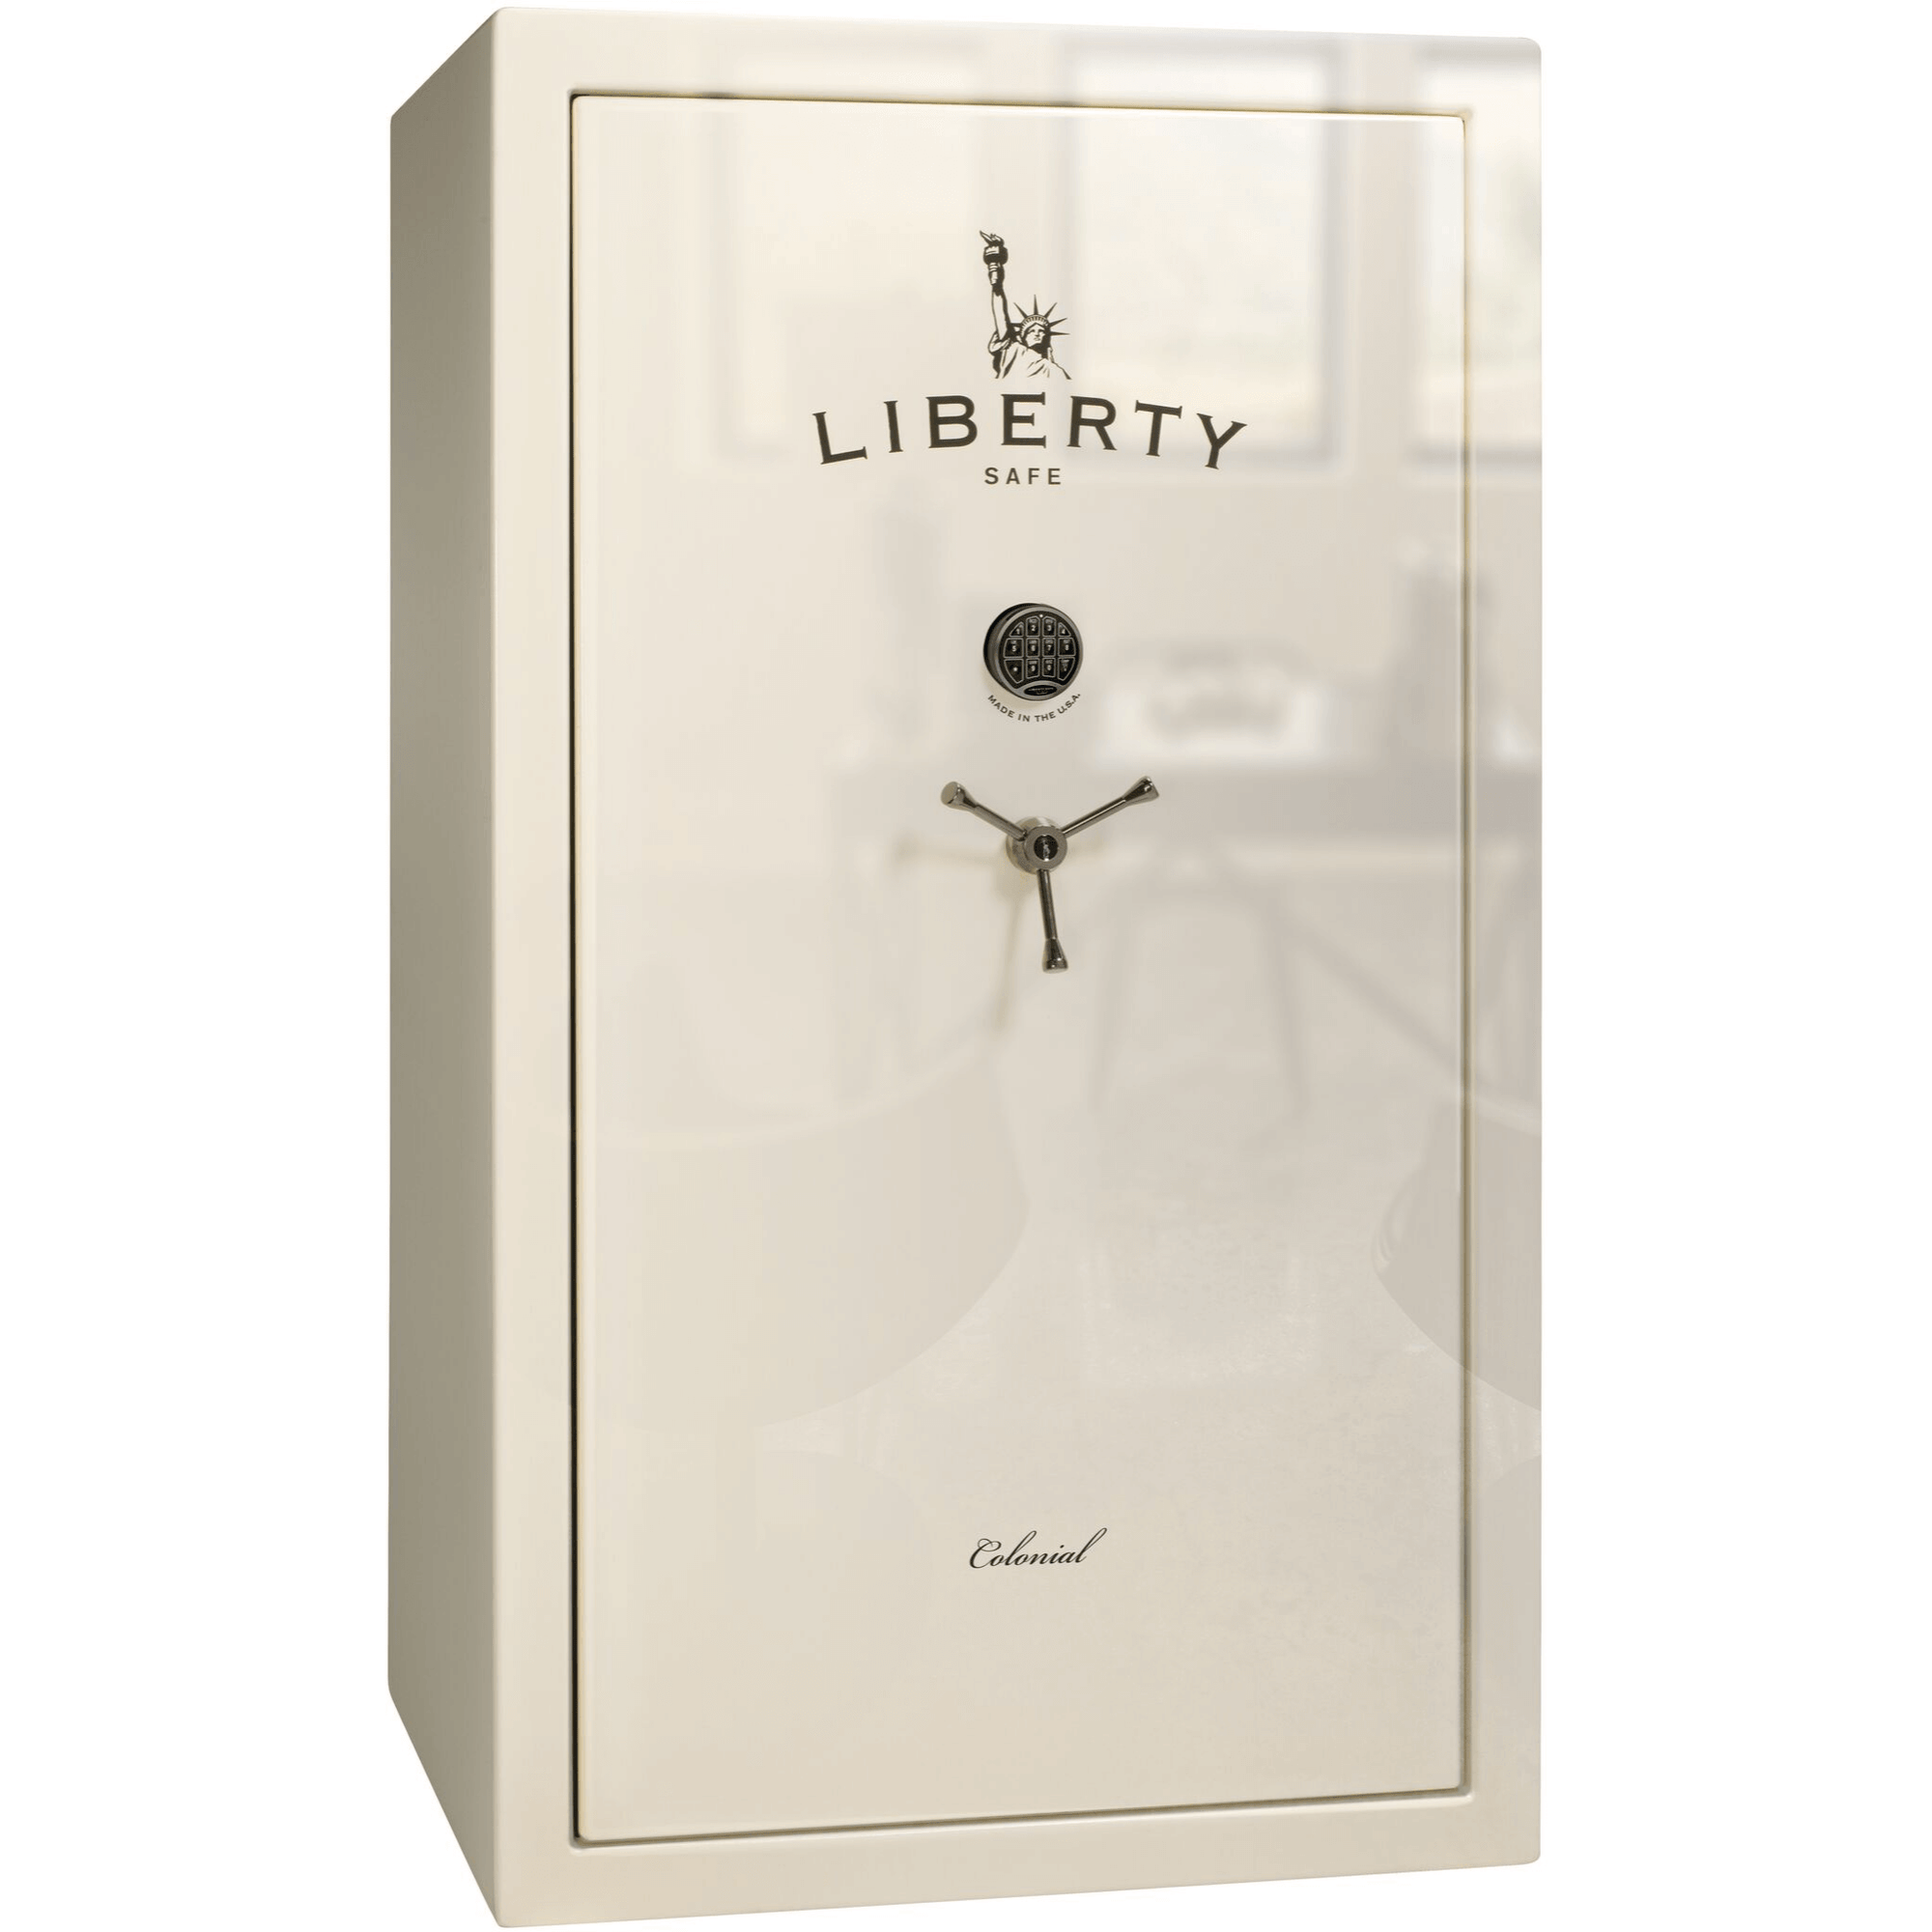 Colonial 50 | Level 4 Security | 75 Minute Fire Protection | White Gloss Black Chrome Electronic Lock | Dimensions: 72.5" H x 42" W x 27.5" D - Closed Door